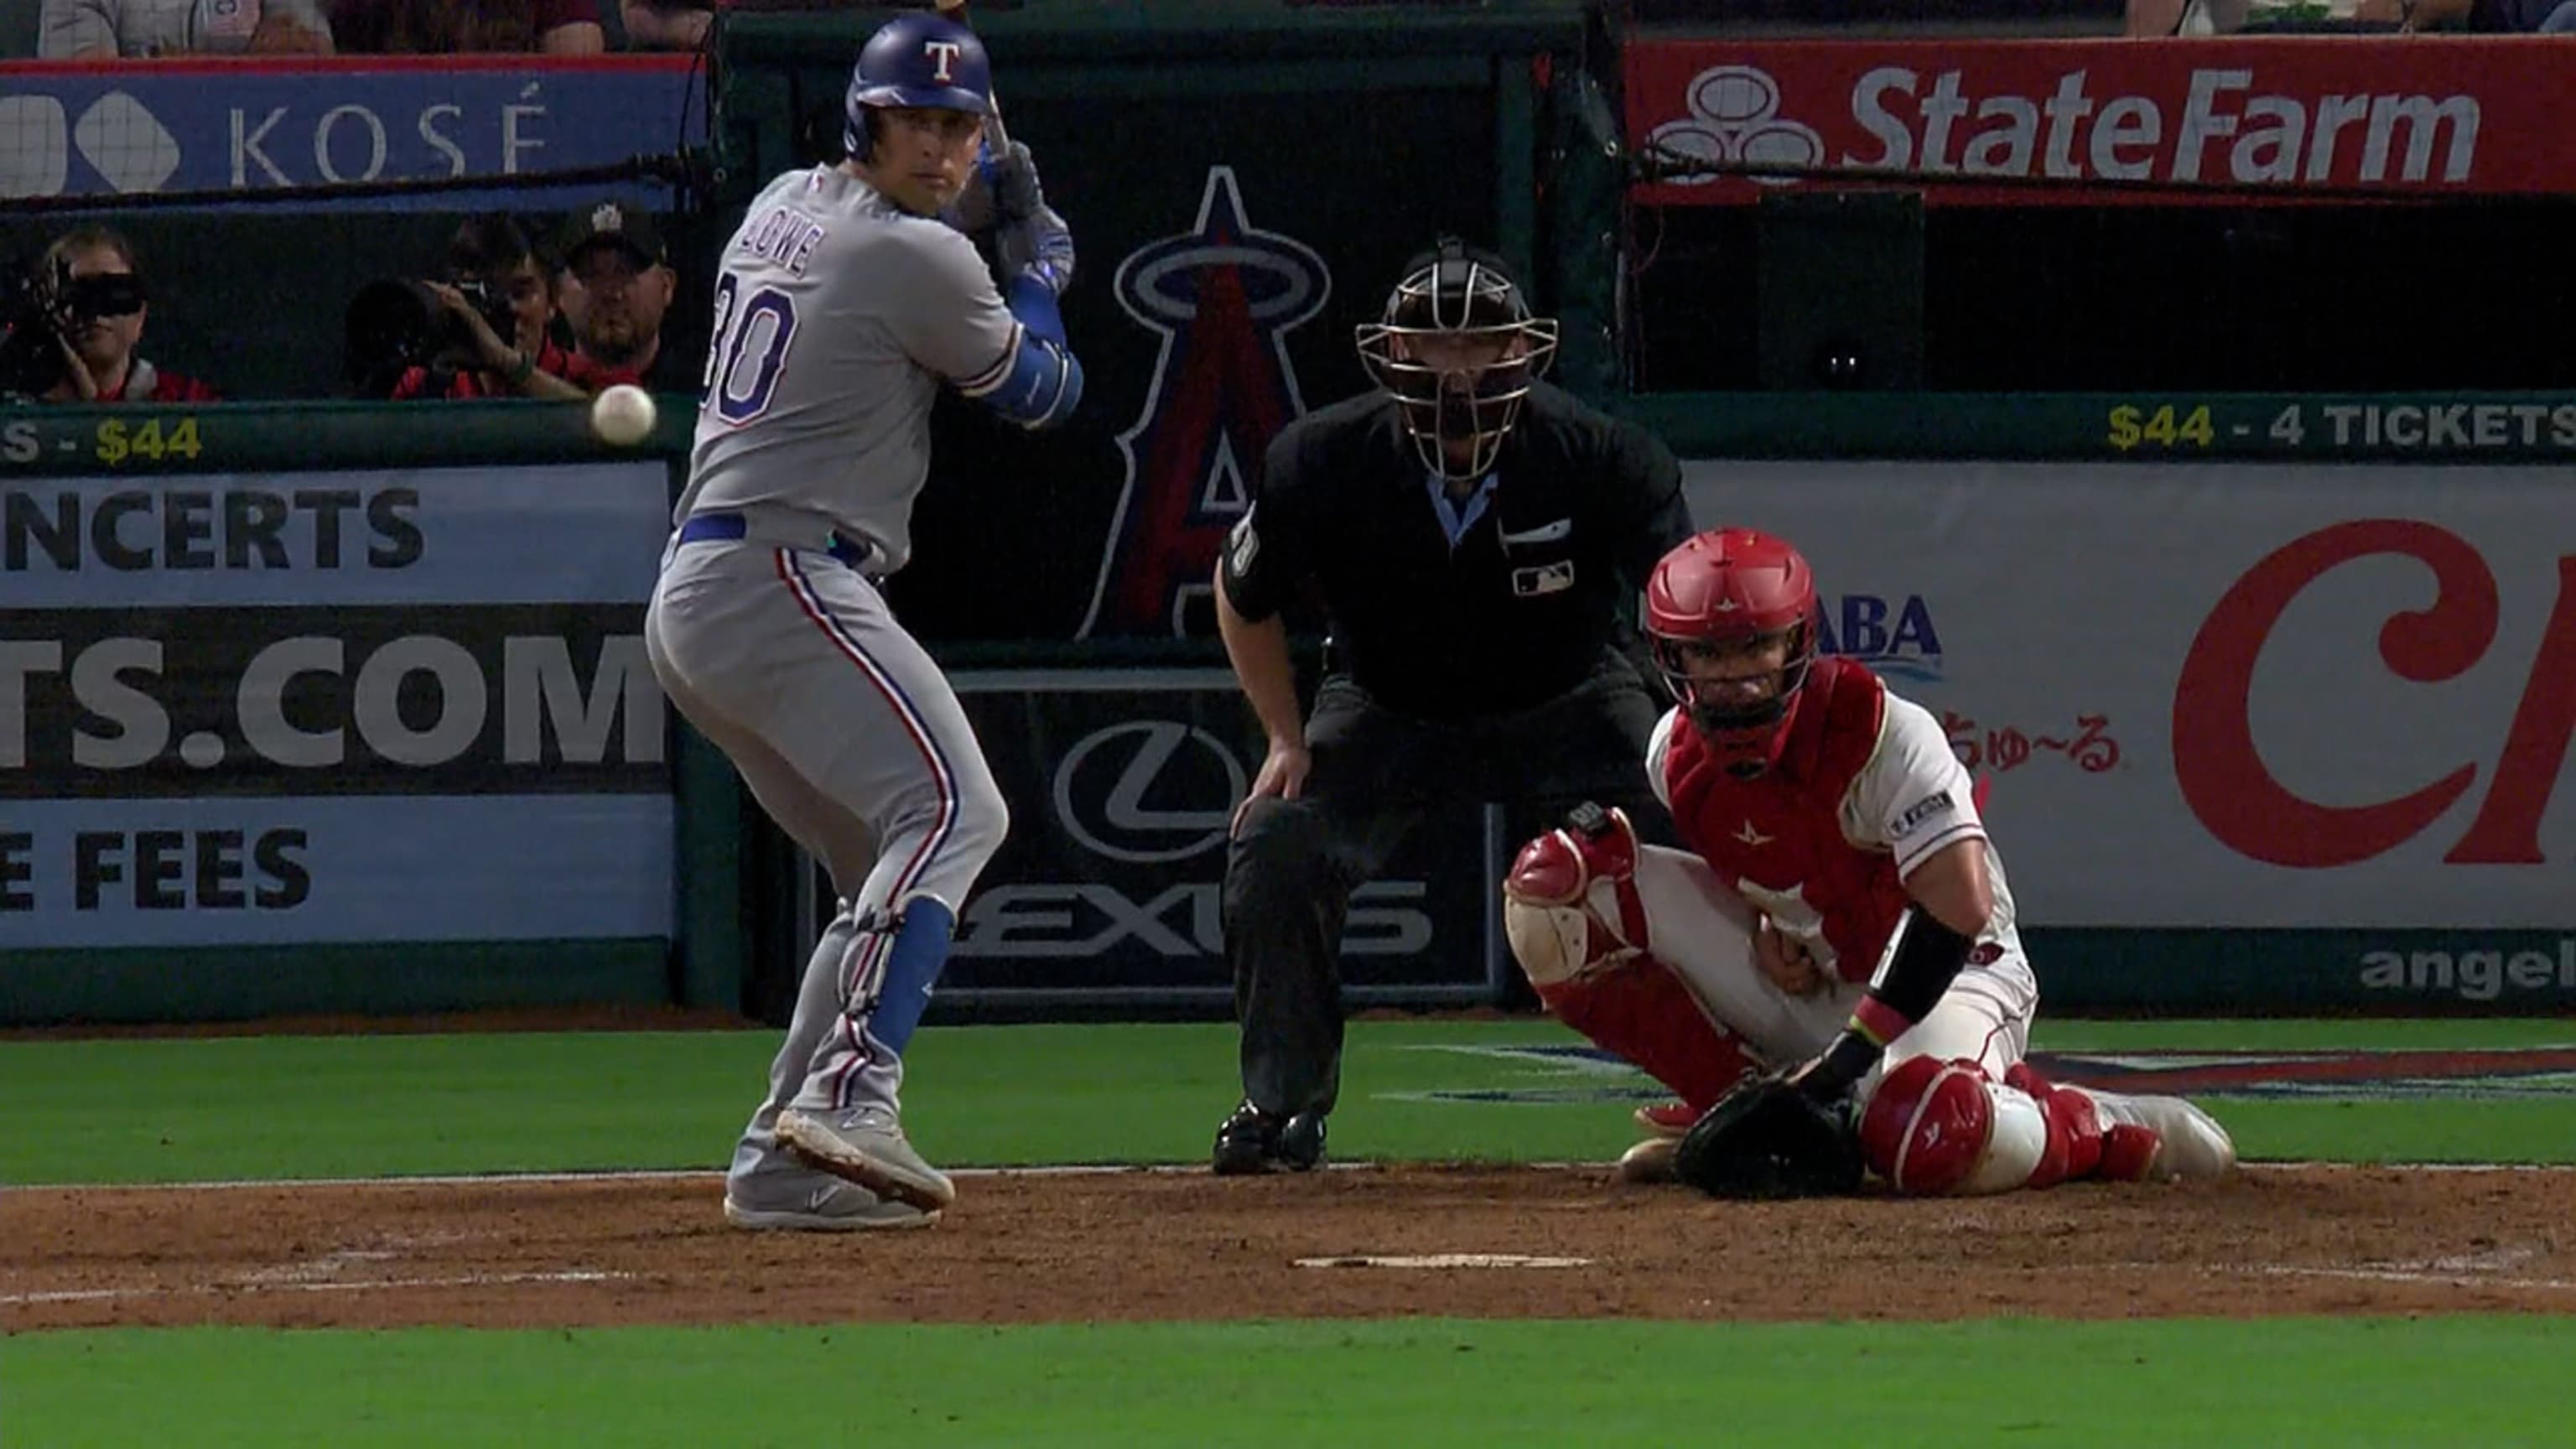 Back-to-back home runs by Semien, Seager propel Rangers past Angels 6-3 –  NBC 5 Dallas-Fort Worth